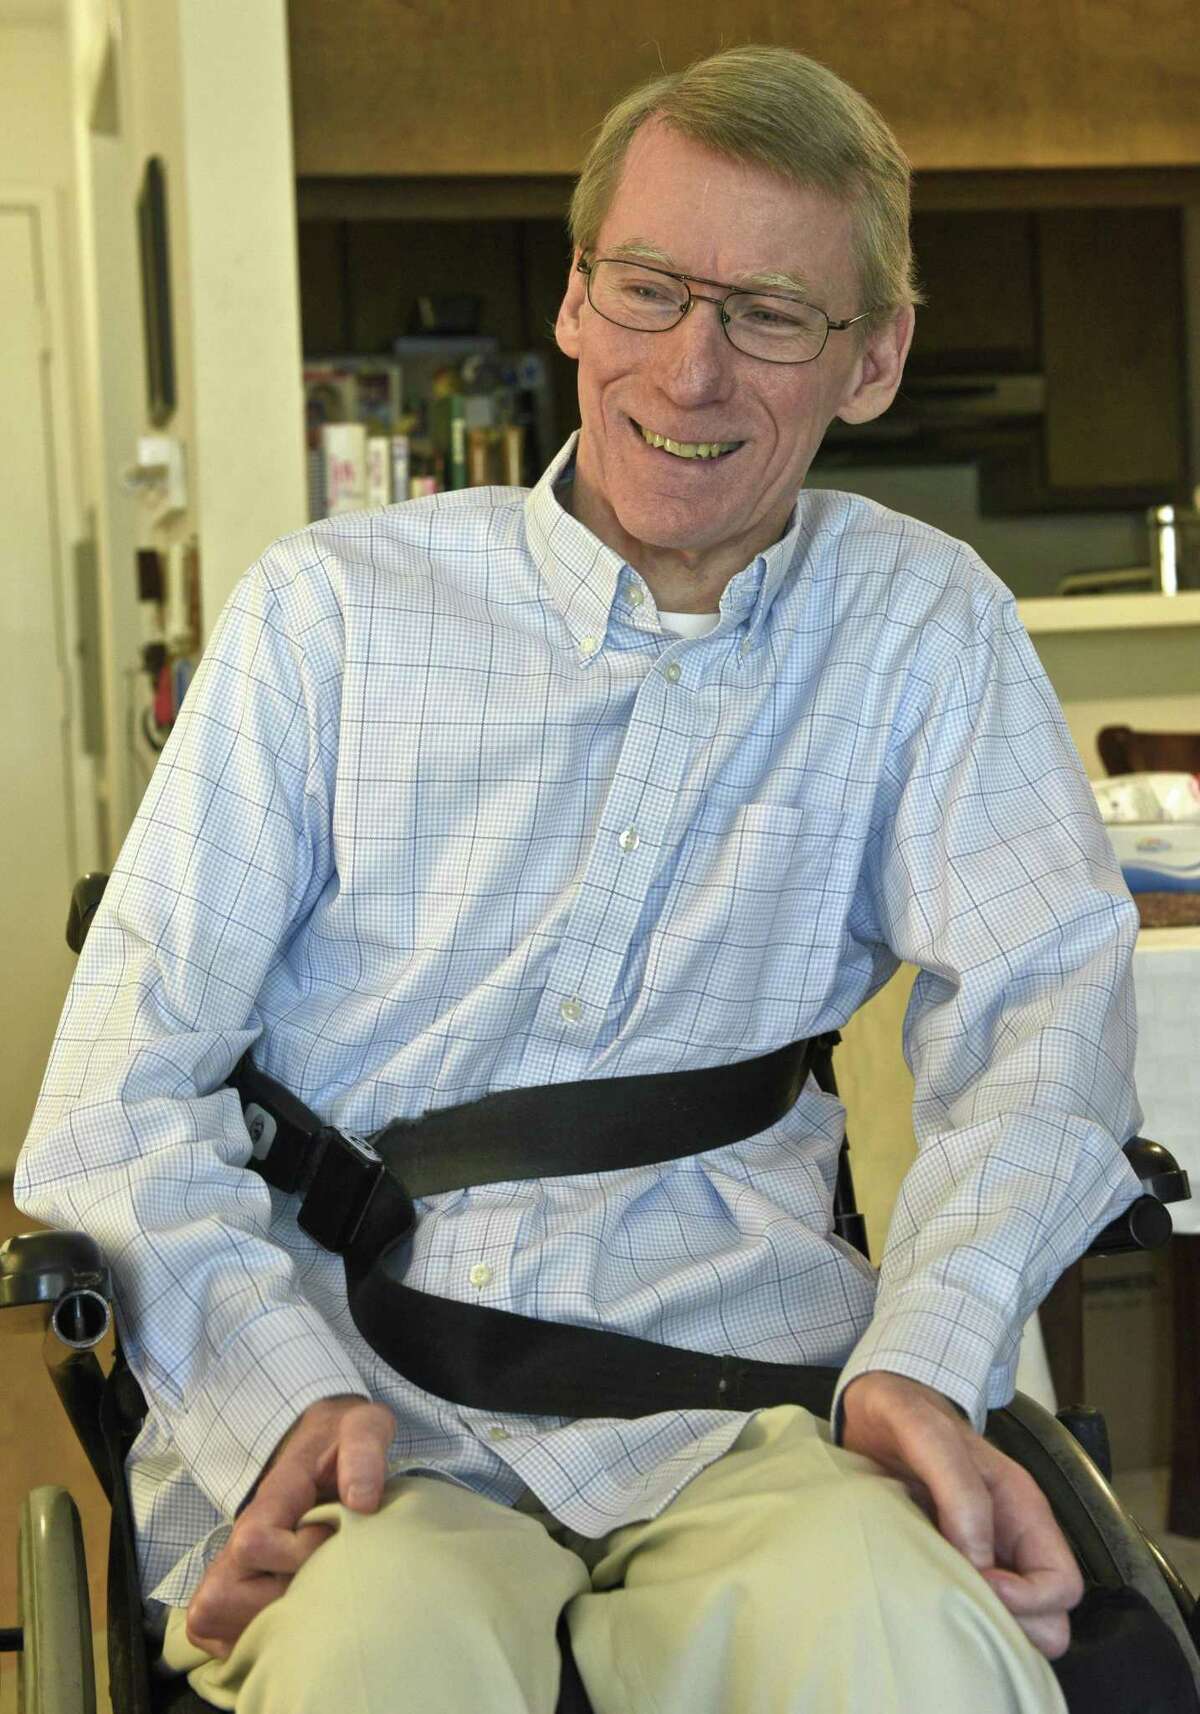 Paul Pateracki, of Danbury, talks about a new support group for people with spinal injuries, he is a co-founder. Monday, July 17, 2017, in Danbury, Conn.